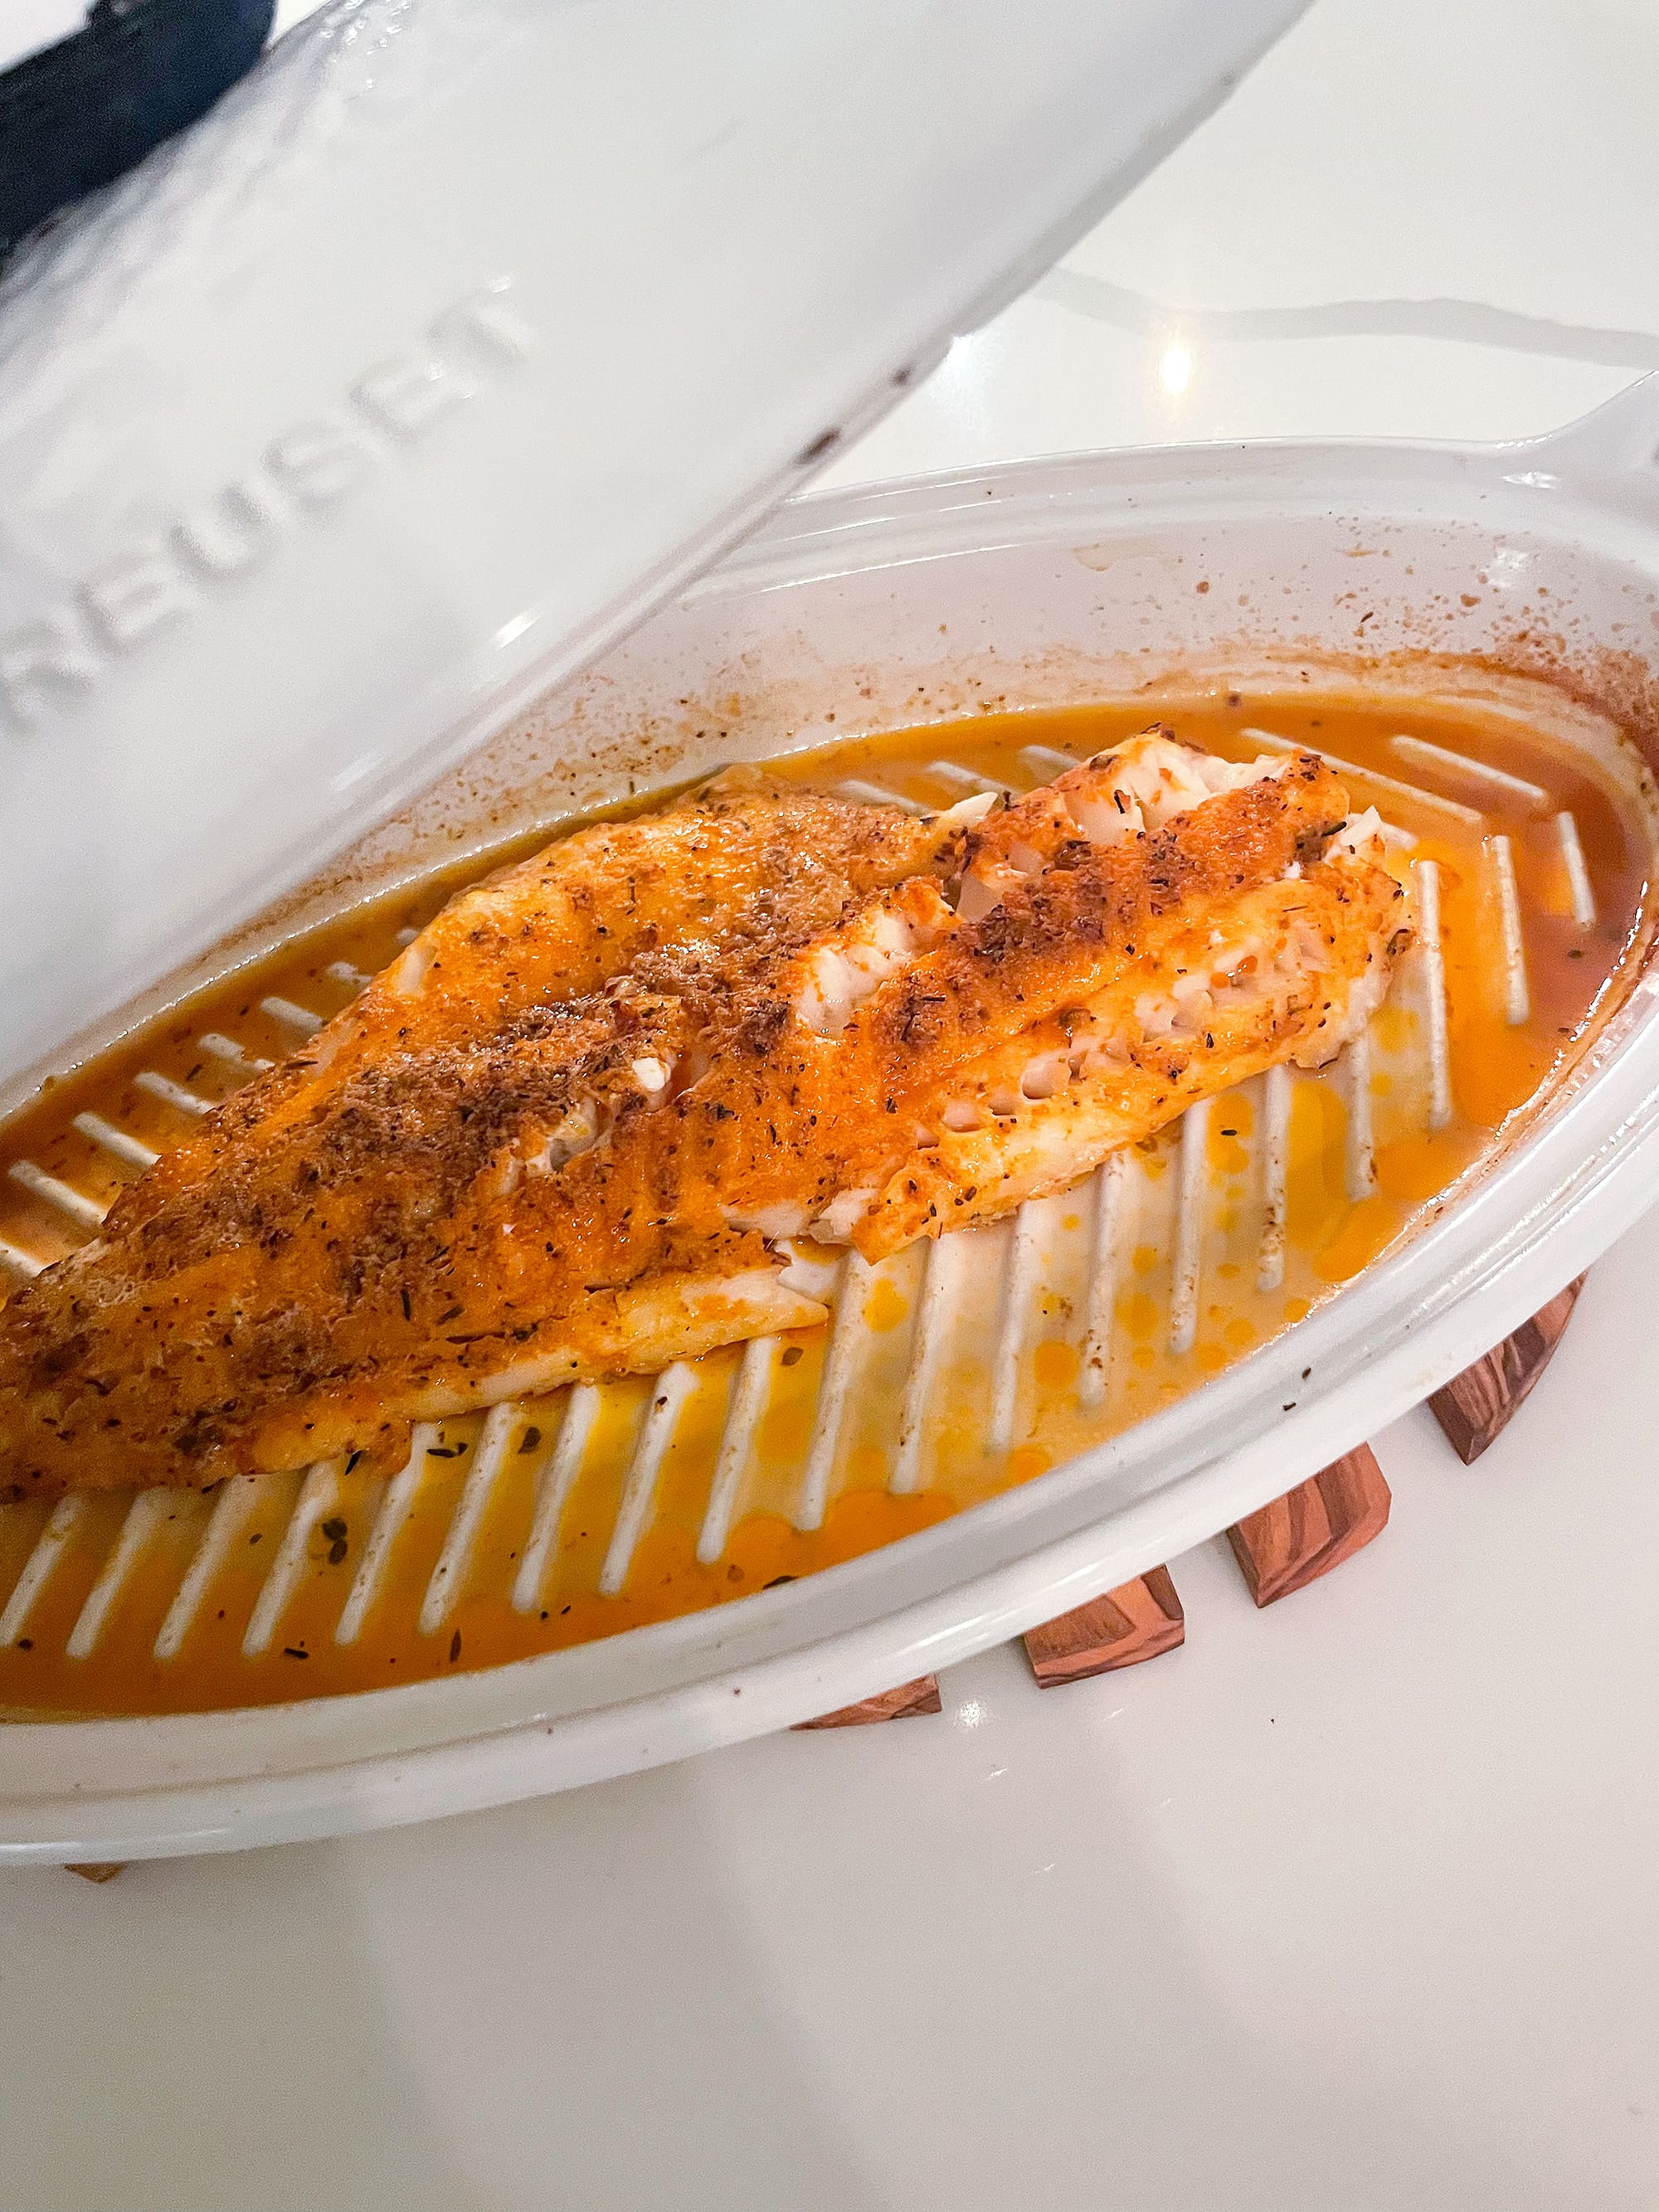 How to Use the Le Creuset Fish Baker